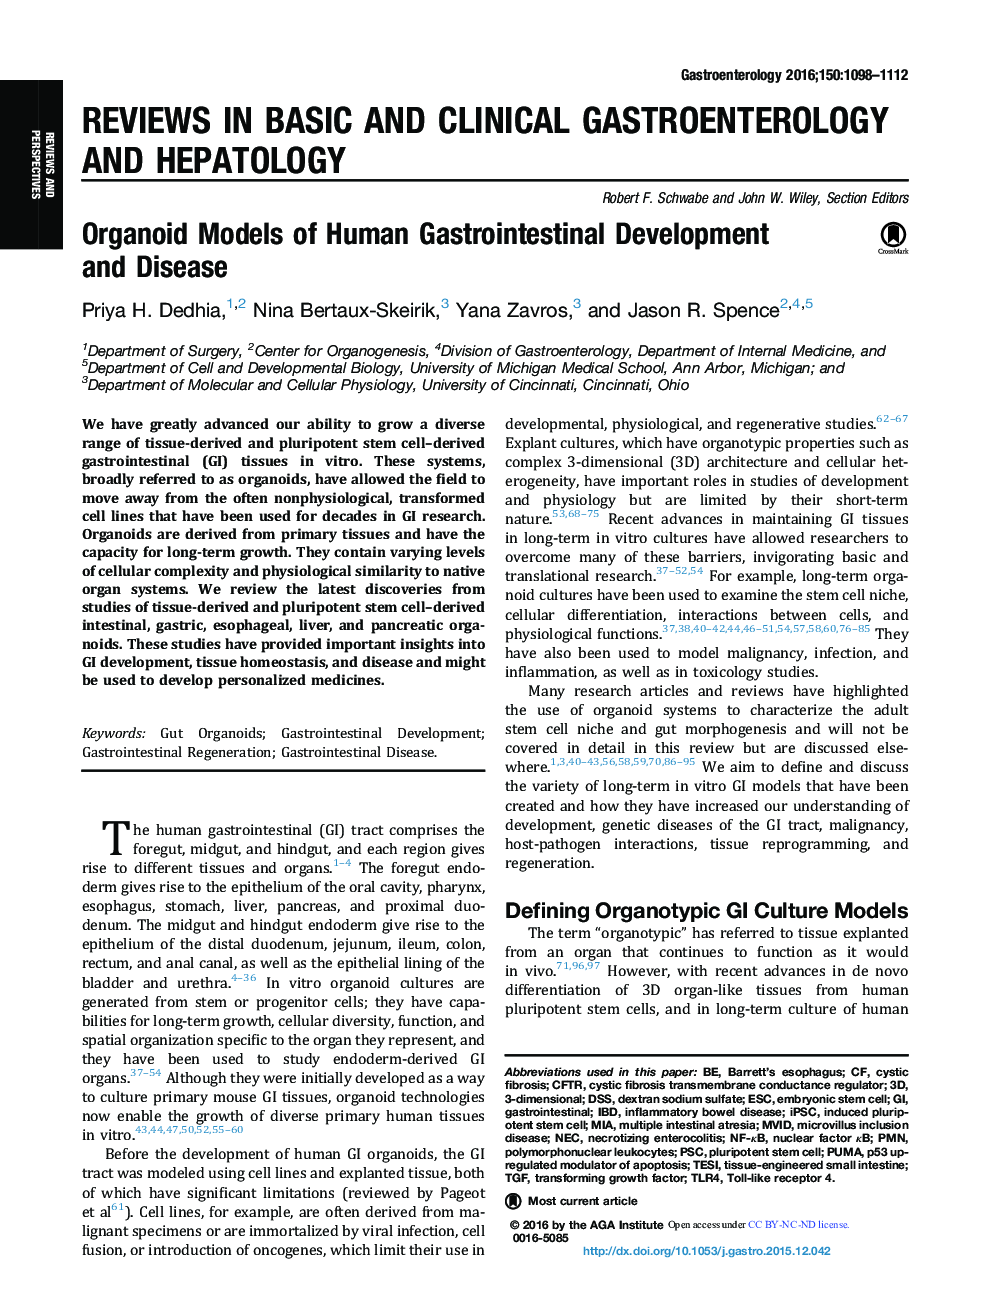 Reviews and PerspectivesReviews in Basic and Clinical Gastroenterology and HepatologyOrganoid Models of Human Gastrointestinal Development andÂ Disease